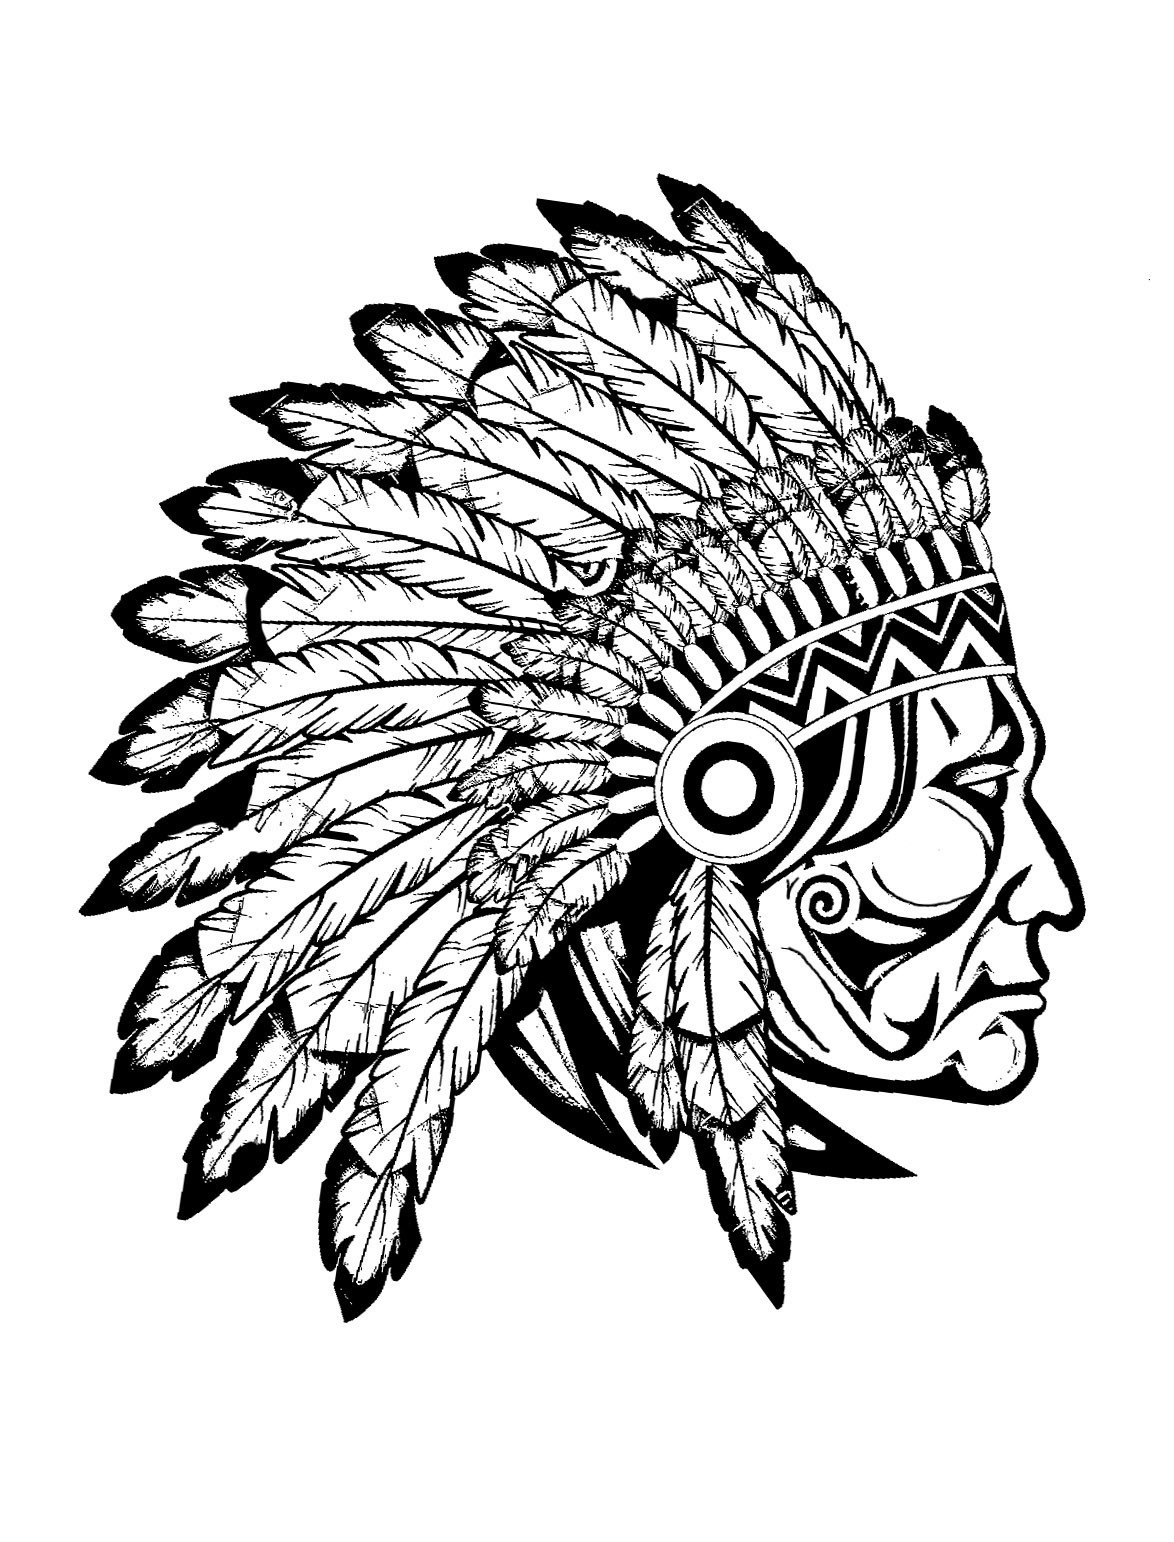 Native American Coloring Pages For Adults
 Indian native chief profile Native American Adult